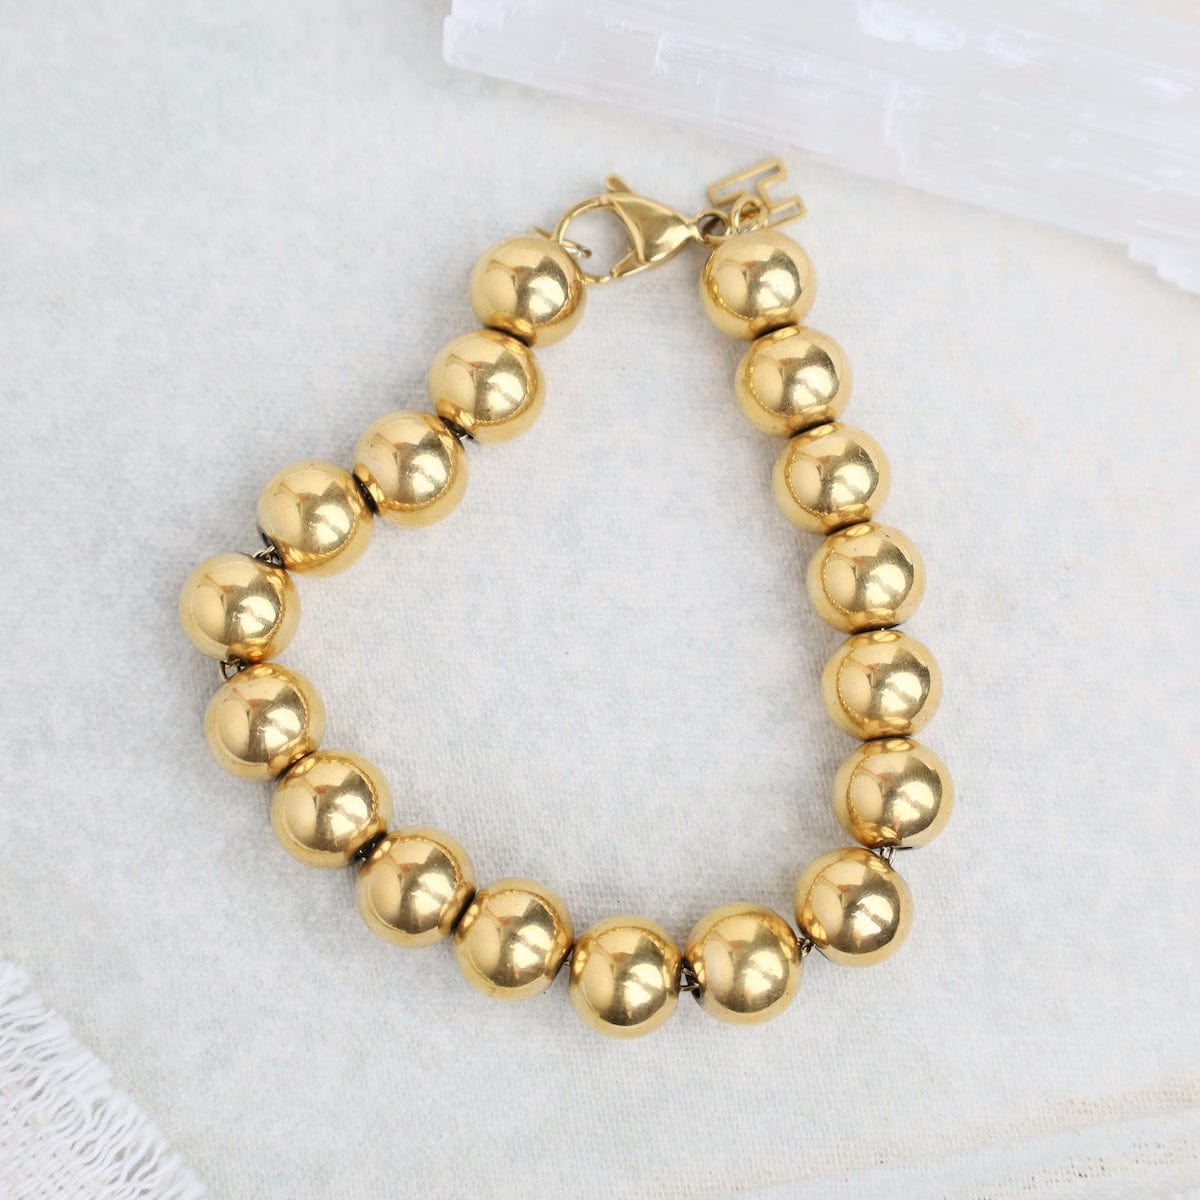 BRC-GPL PIA // The ball bracelet - 18k gold plated stainle